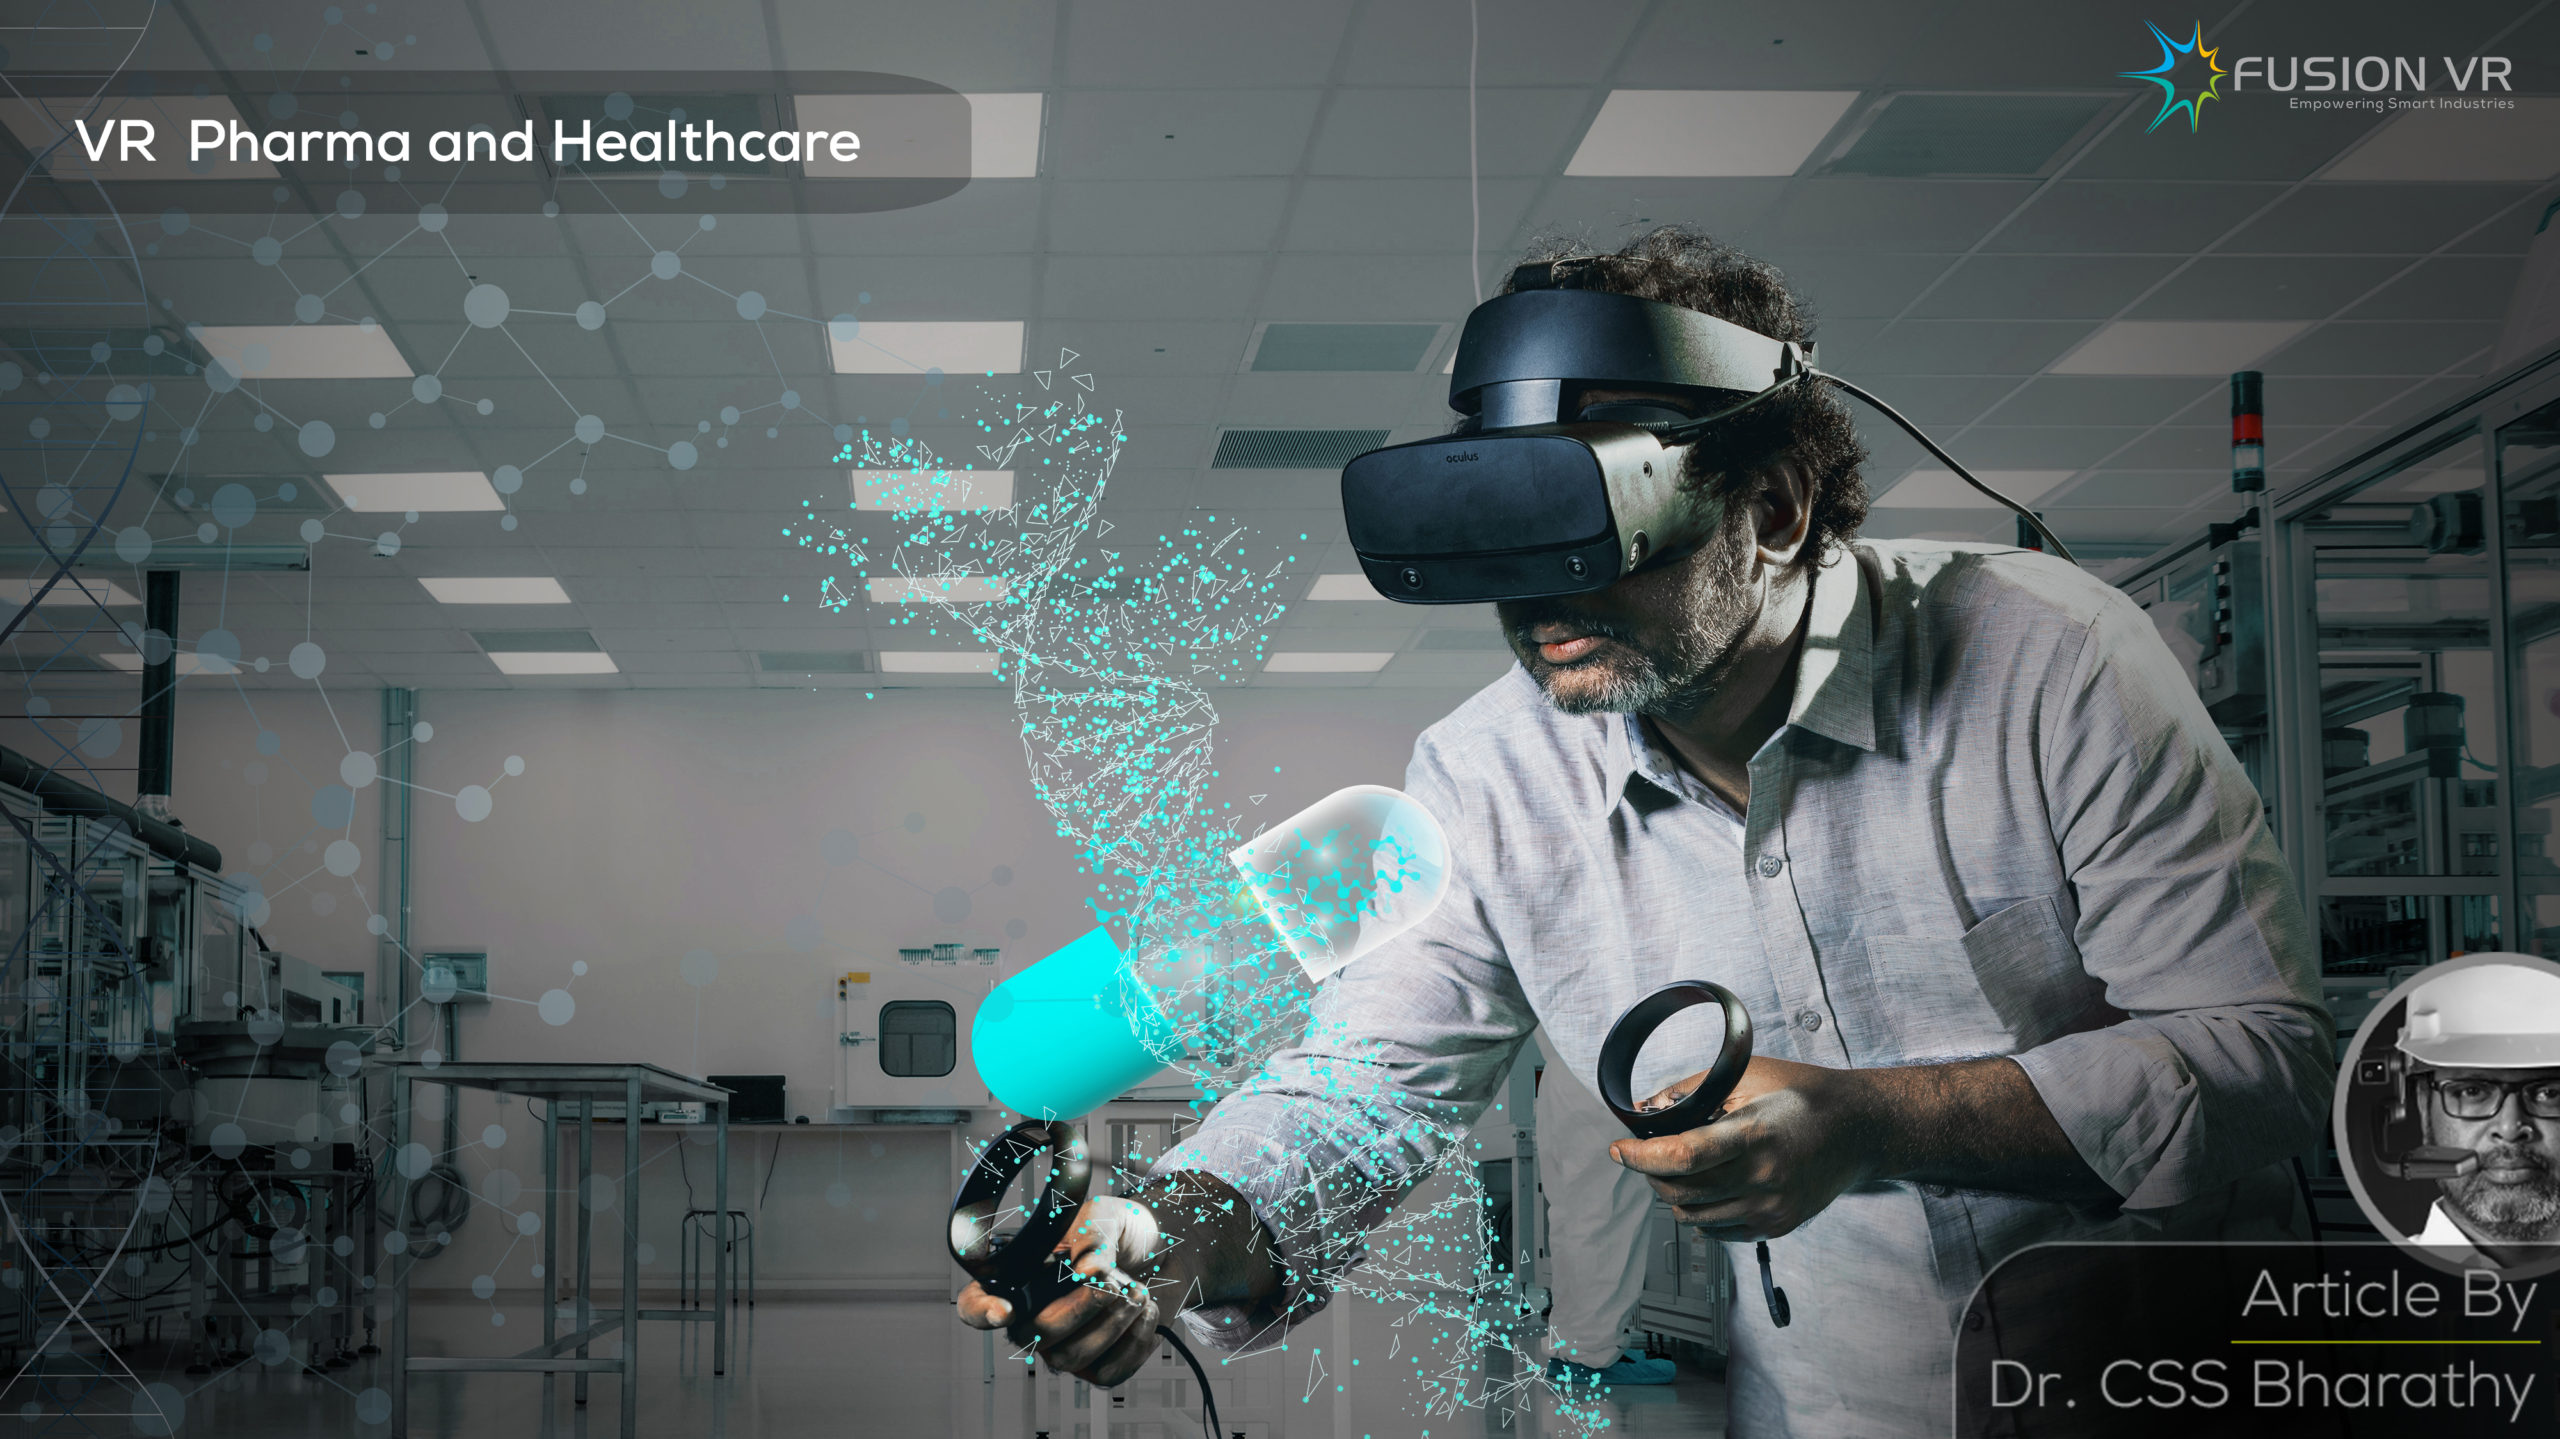 FusionVR Accelerates Immersive Industry 4.0 Solutions for Pharma and Healthcare